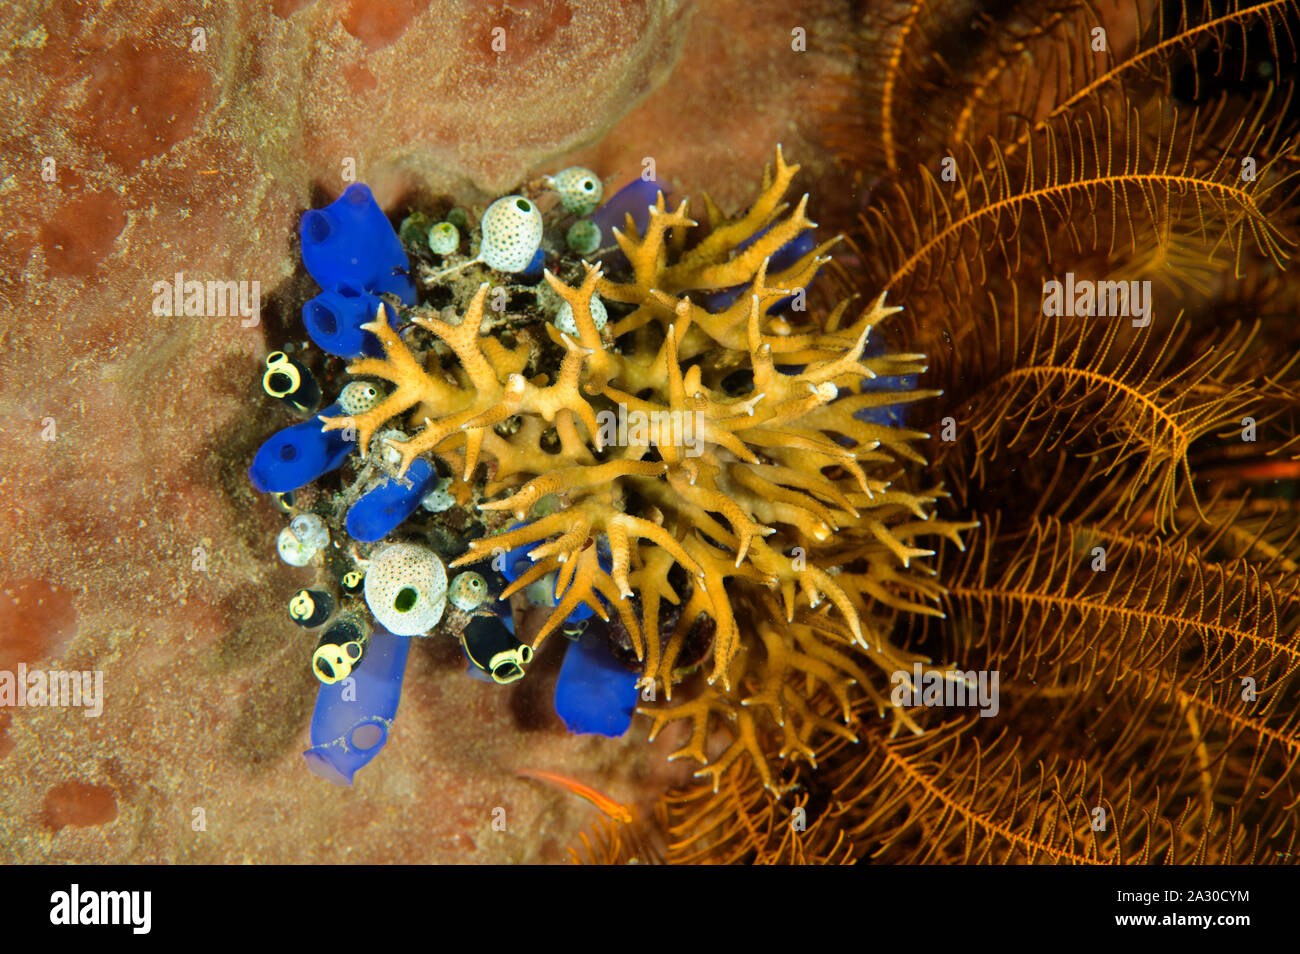 Cluster of ascidians and firecoral, Sulawesi Indonesia. Stock Photo